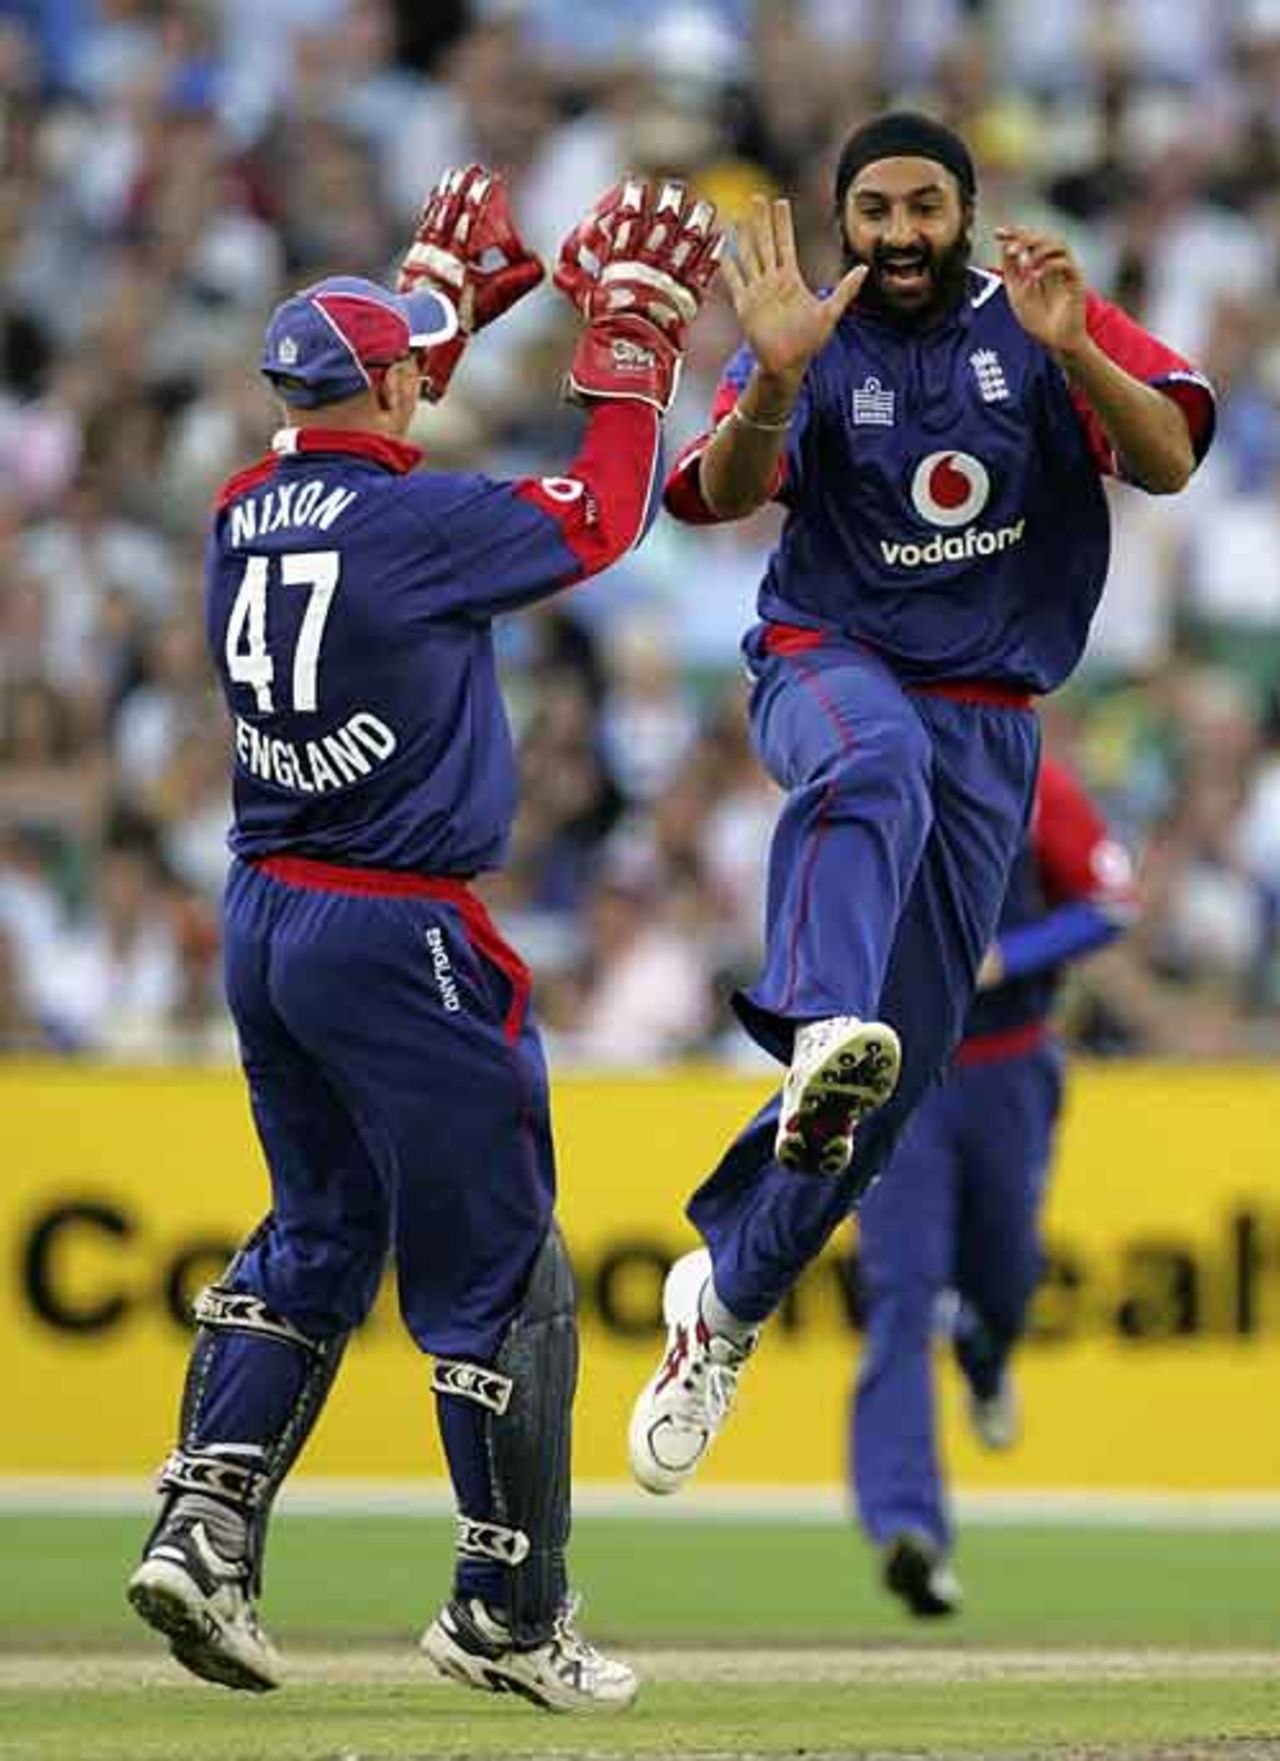 Monty Panesar celebrates removing Adam Gilchrist for his first ODI wicket, Australia v England, Commonwealth Bank Series, 1st Match, Melbourne, January 12, 2007